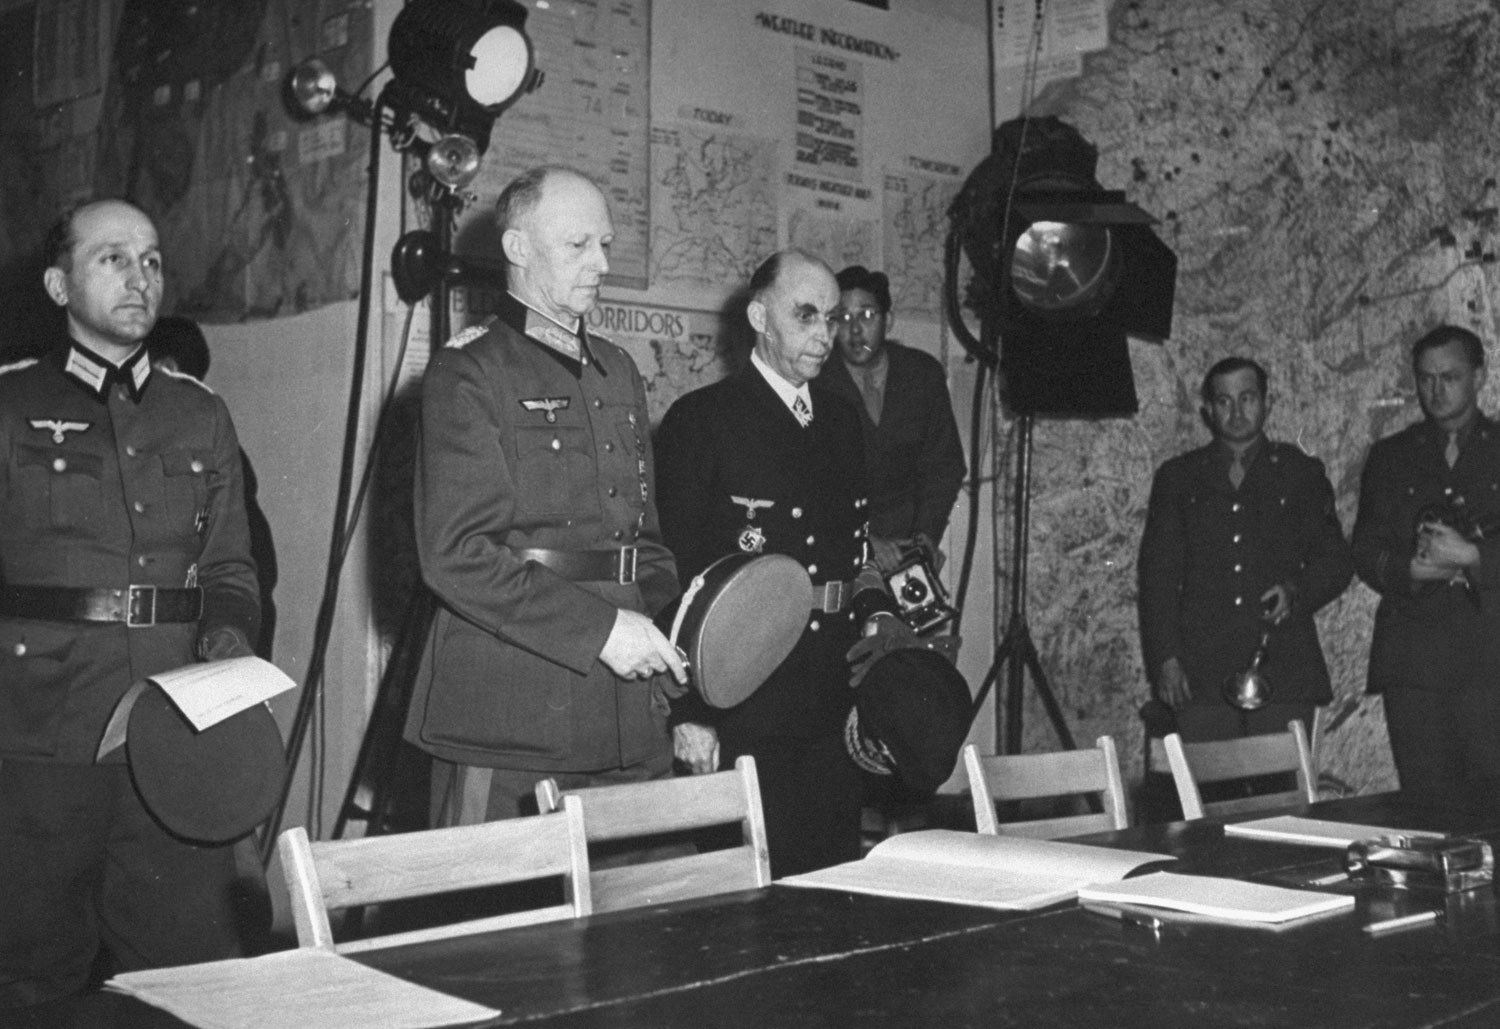 ColGen Alfred Jodl approaching the table with the documents of surrender, Reims, France, 7 May 1945. His aide, Maj Wilhelm Oxenius, is on the left and Kriegsmarine Admiral Hans-Georg Von Friedeburg is on the right